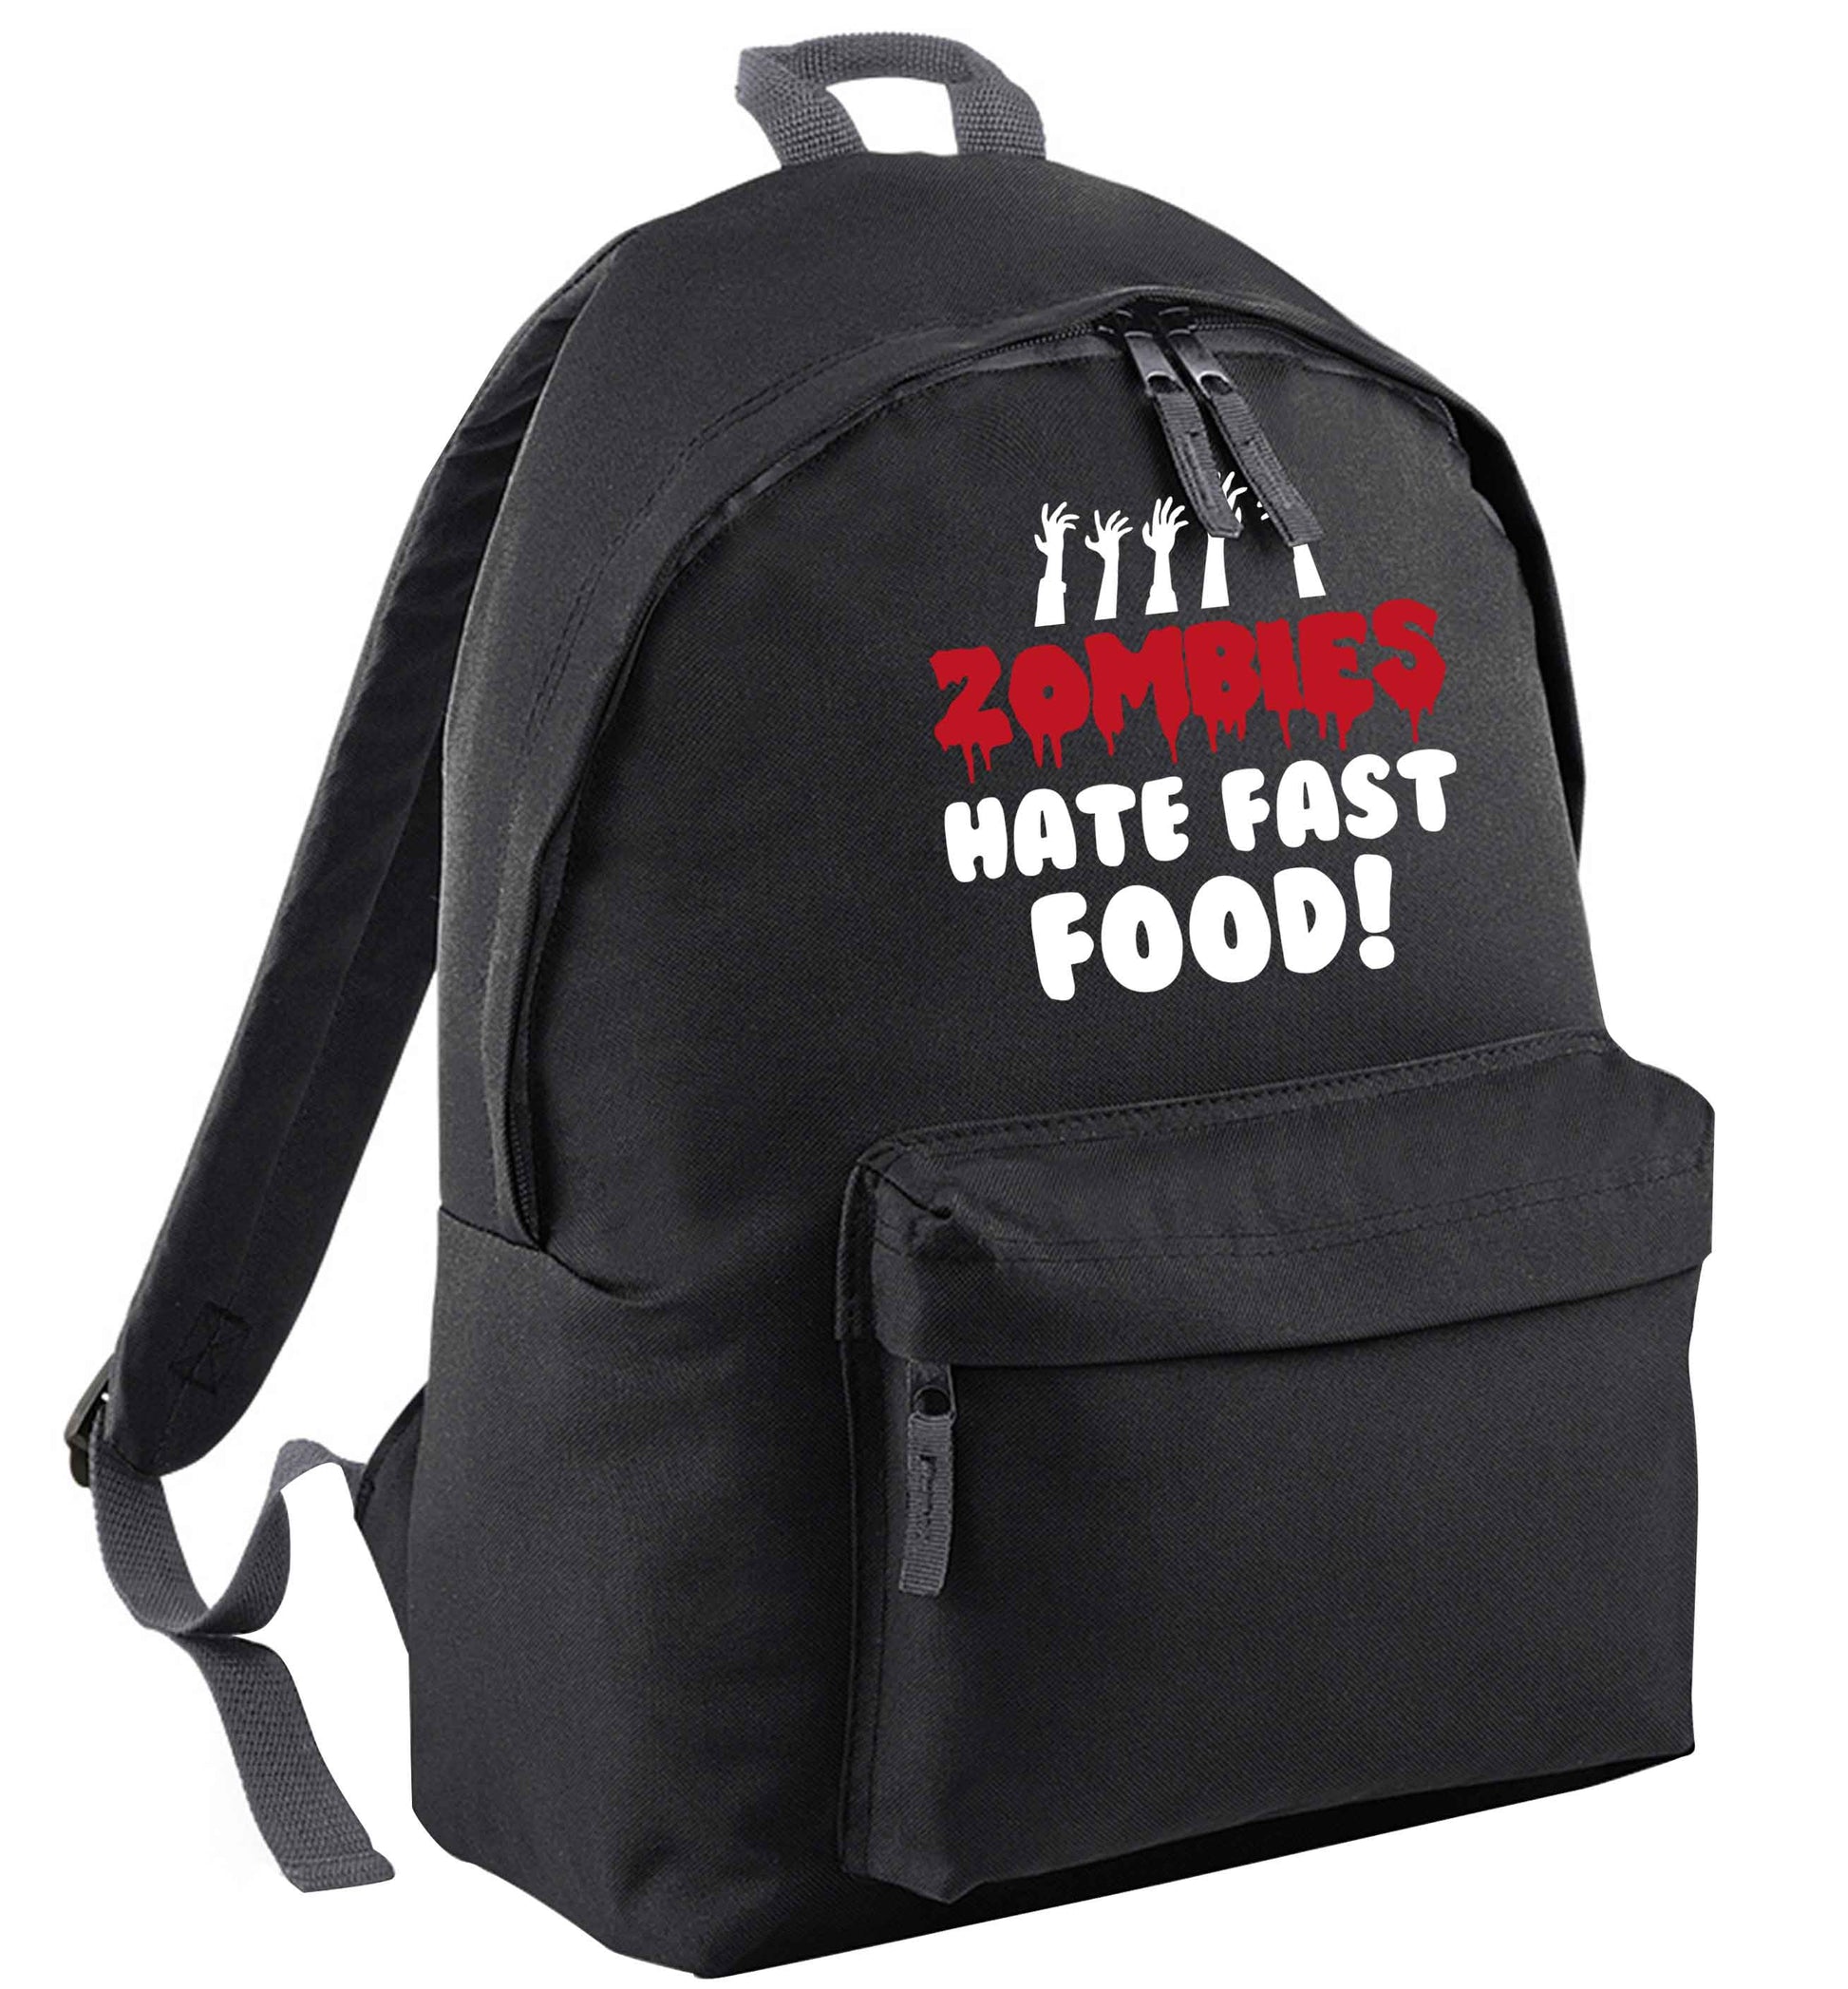 Zombies hate fast food black adults backpack